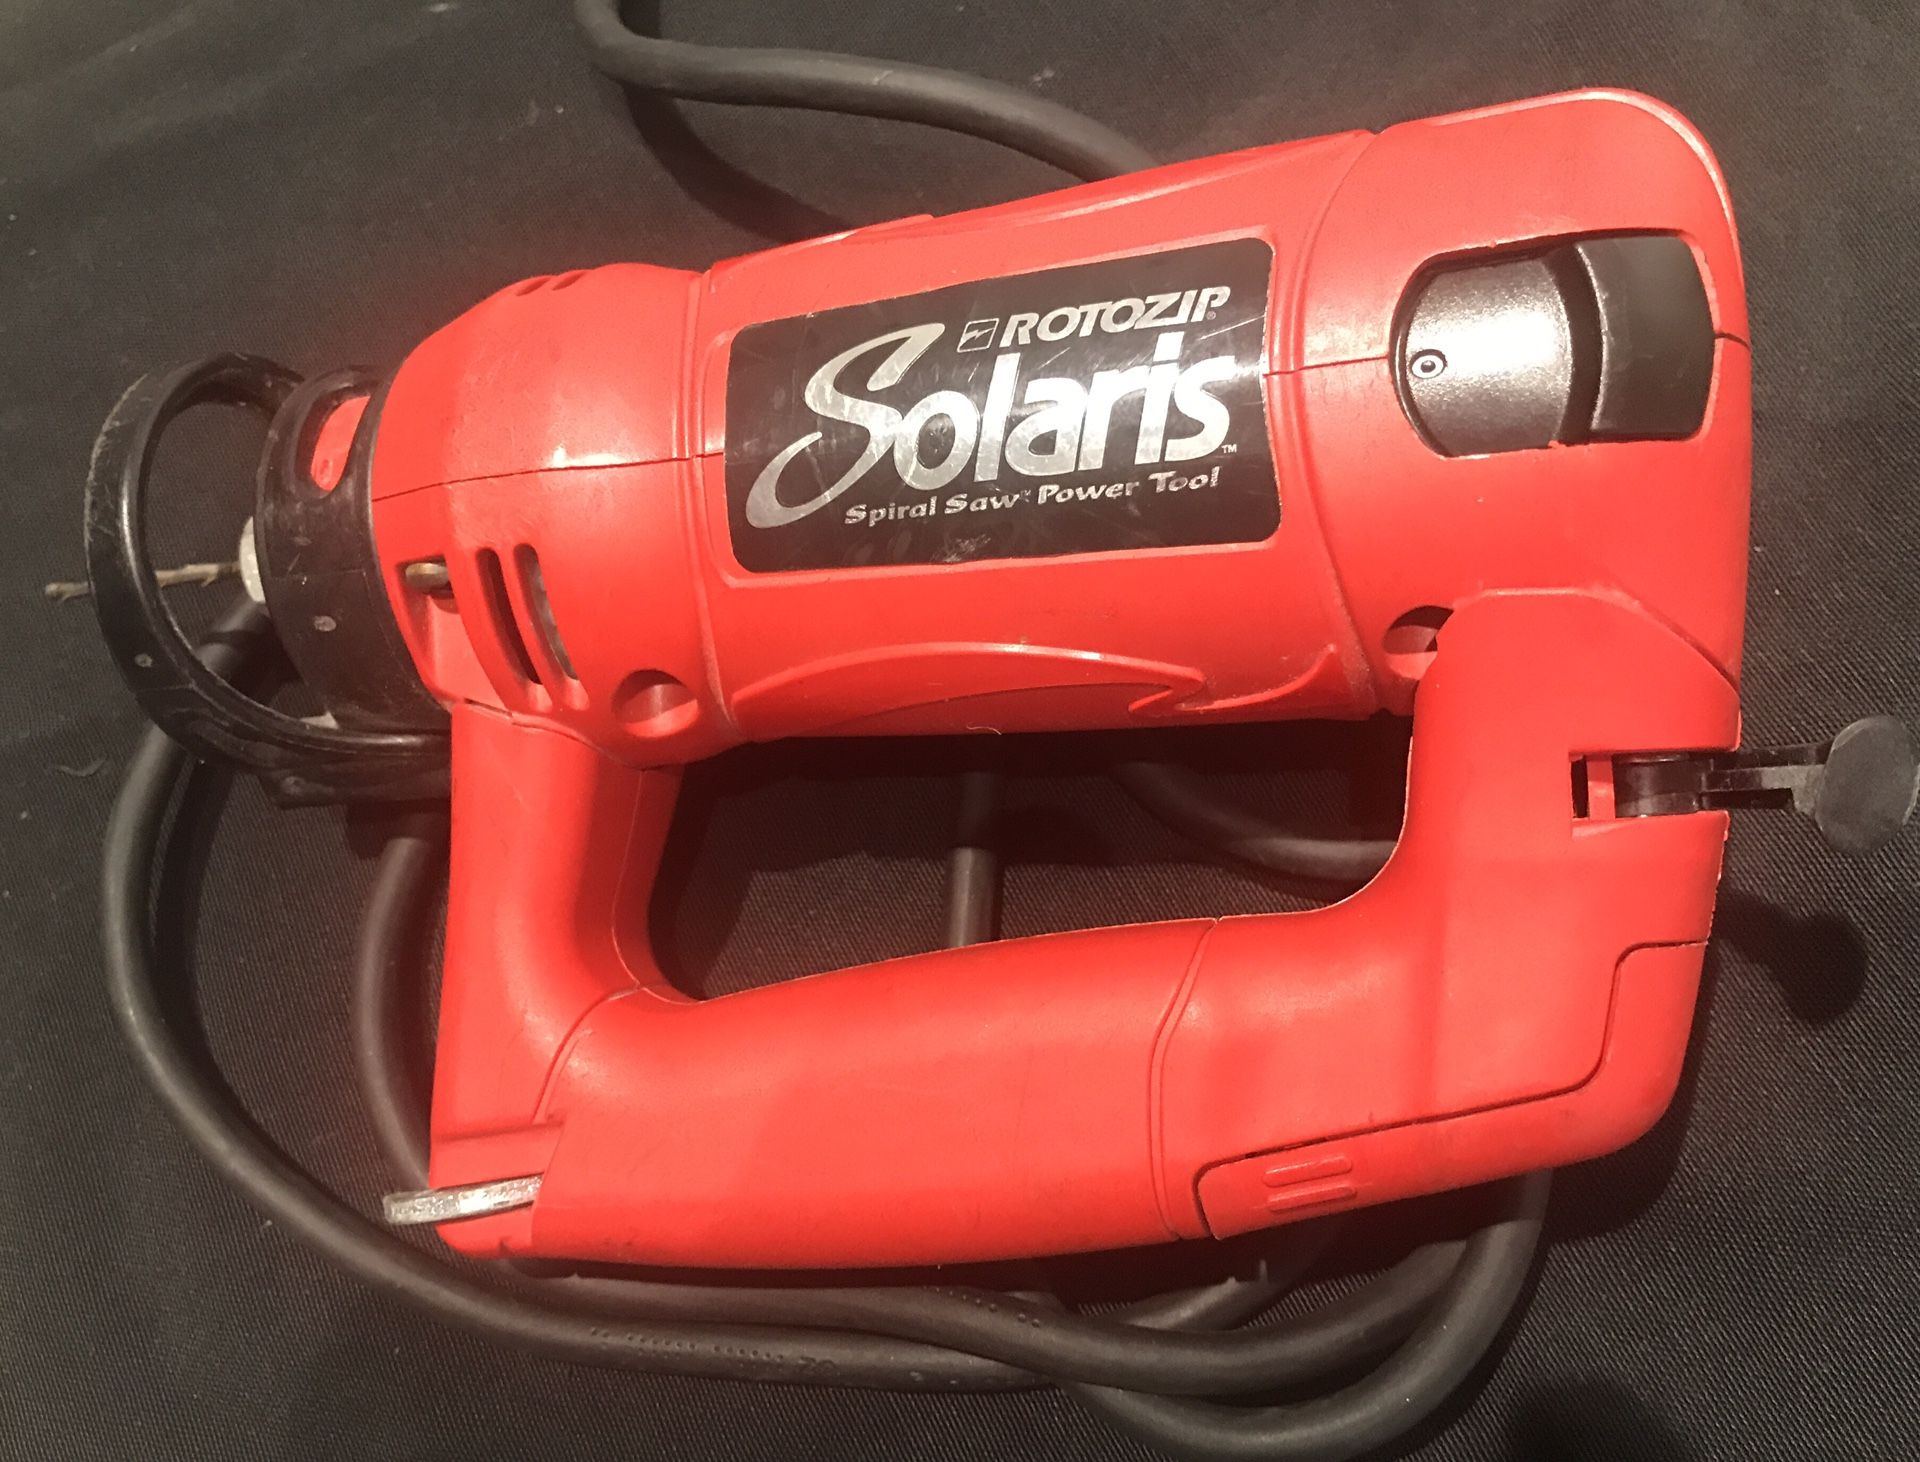 Solaris ROTOZIP Spiral Saw Power Tool